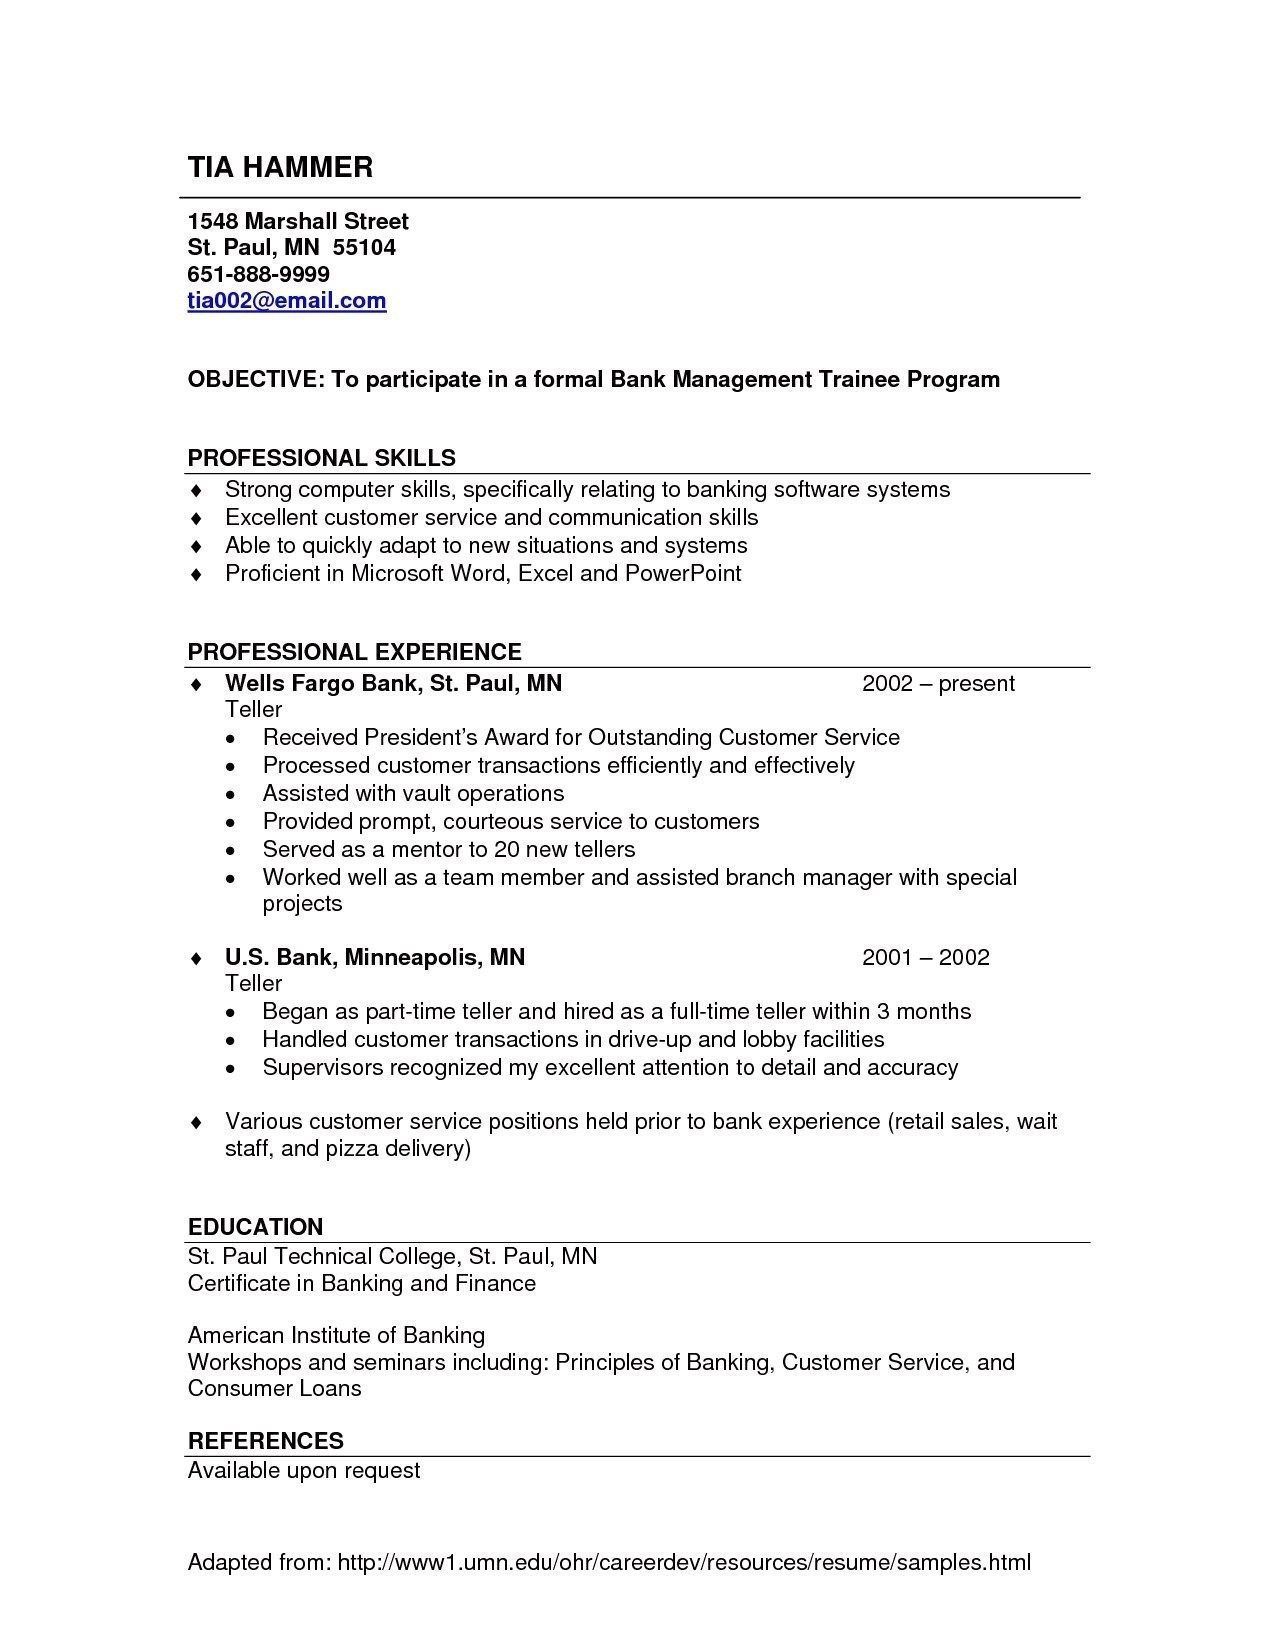 How to write resume tips skills? In a resume, there are ...